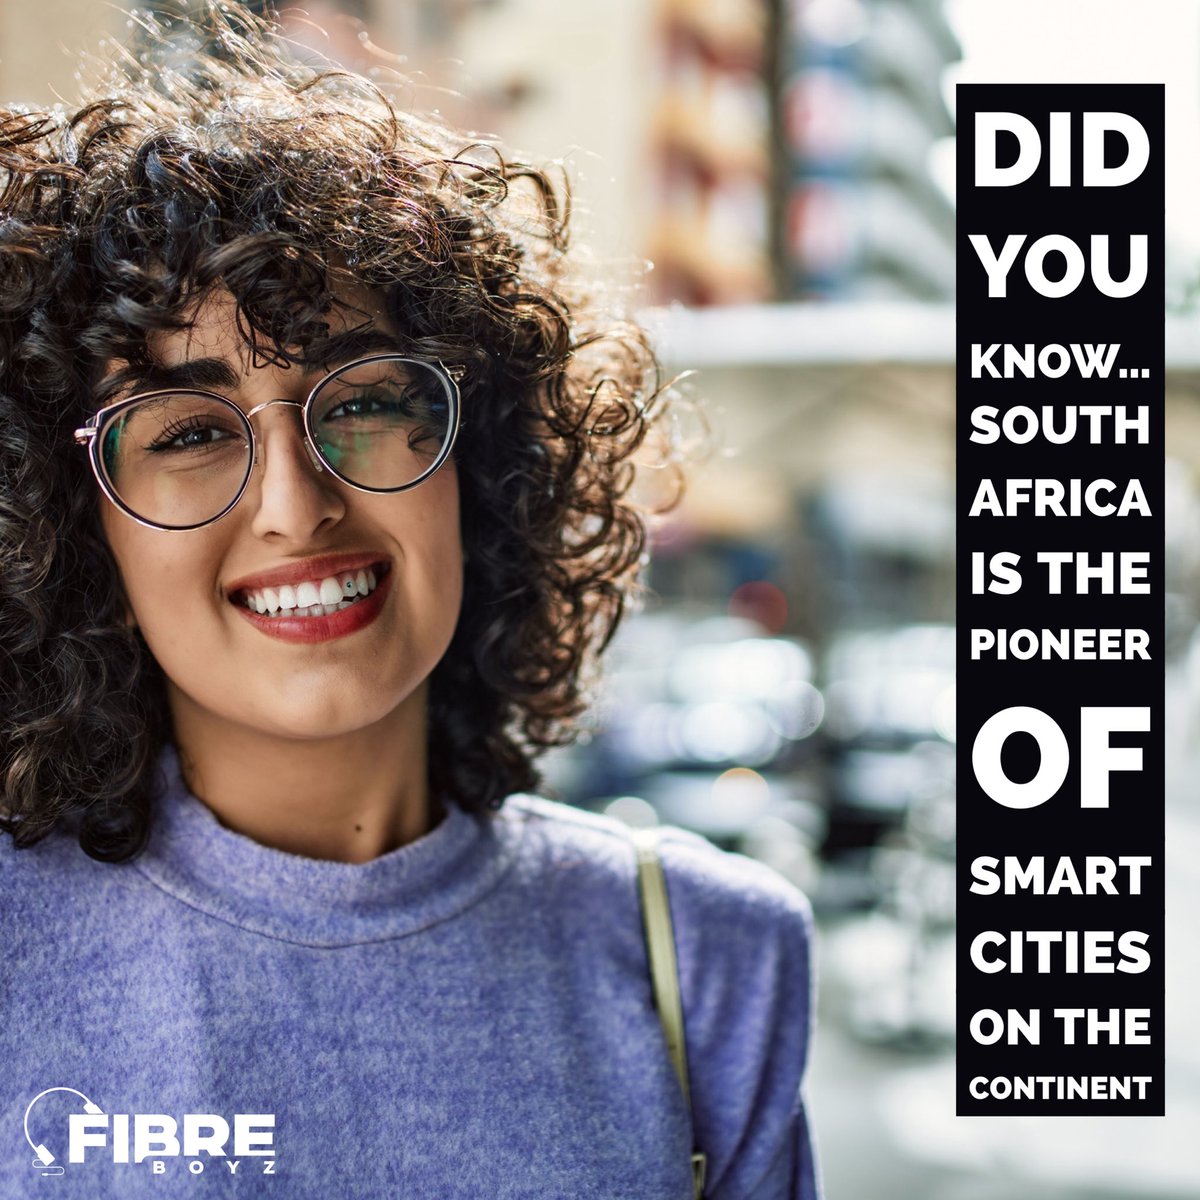 Hey South Africa! 🌟 Here's another fun #fibreboyzfact: Mzansi is pioneering smart city technologies in Africa! 🏙️🌐 In cities like Pretoria and Cape Town, initiatives are underway to integrate IoT solutions to manage everything stories and thoughts using #SmartCitySA 🤖💡